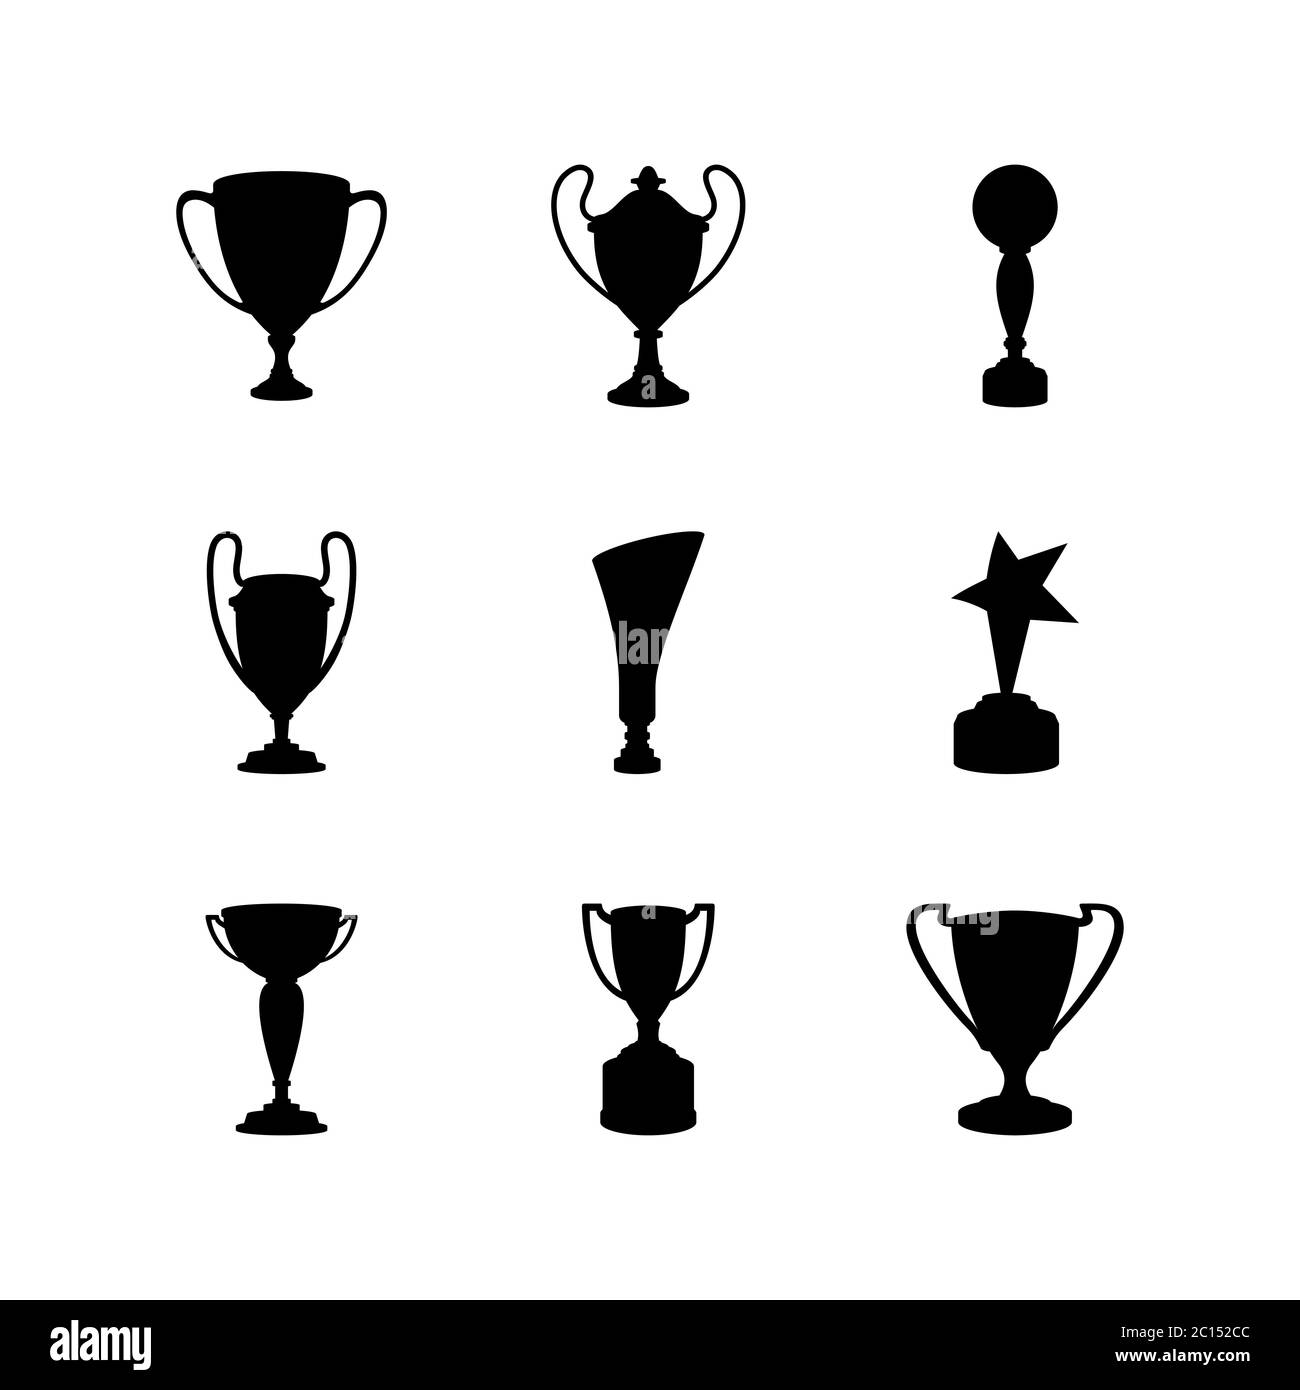 silhouettes of various trophy variations for the winner of a championship. Cup trophy design as a champion award. Stock Vector